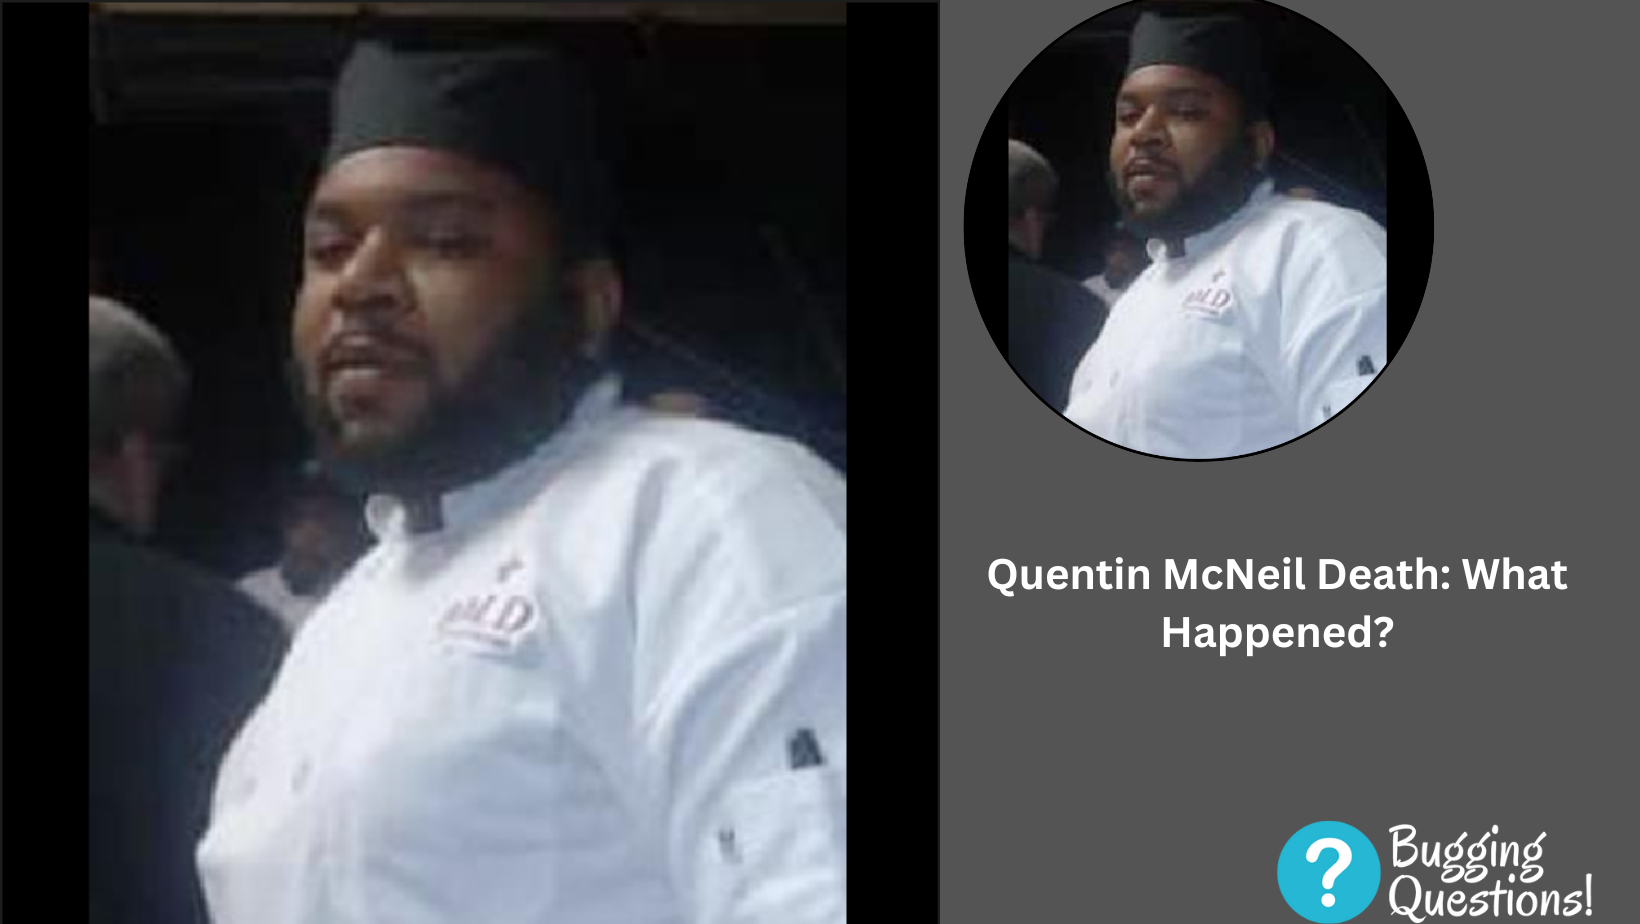 Quentin McNeil Death: What Happened?